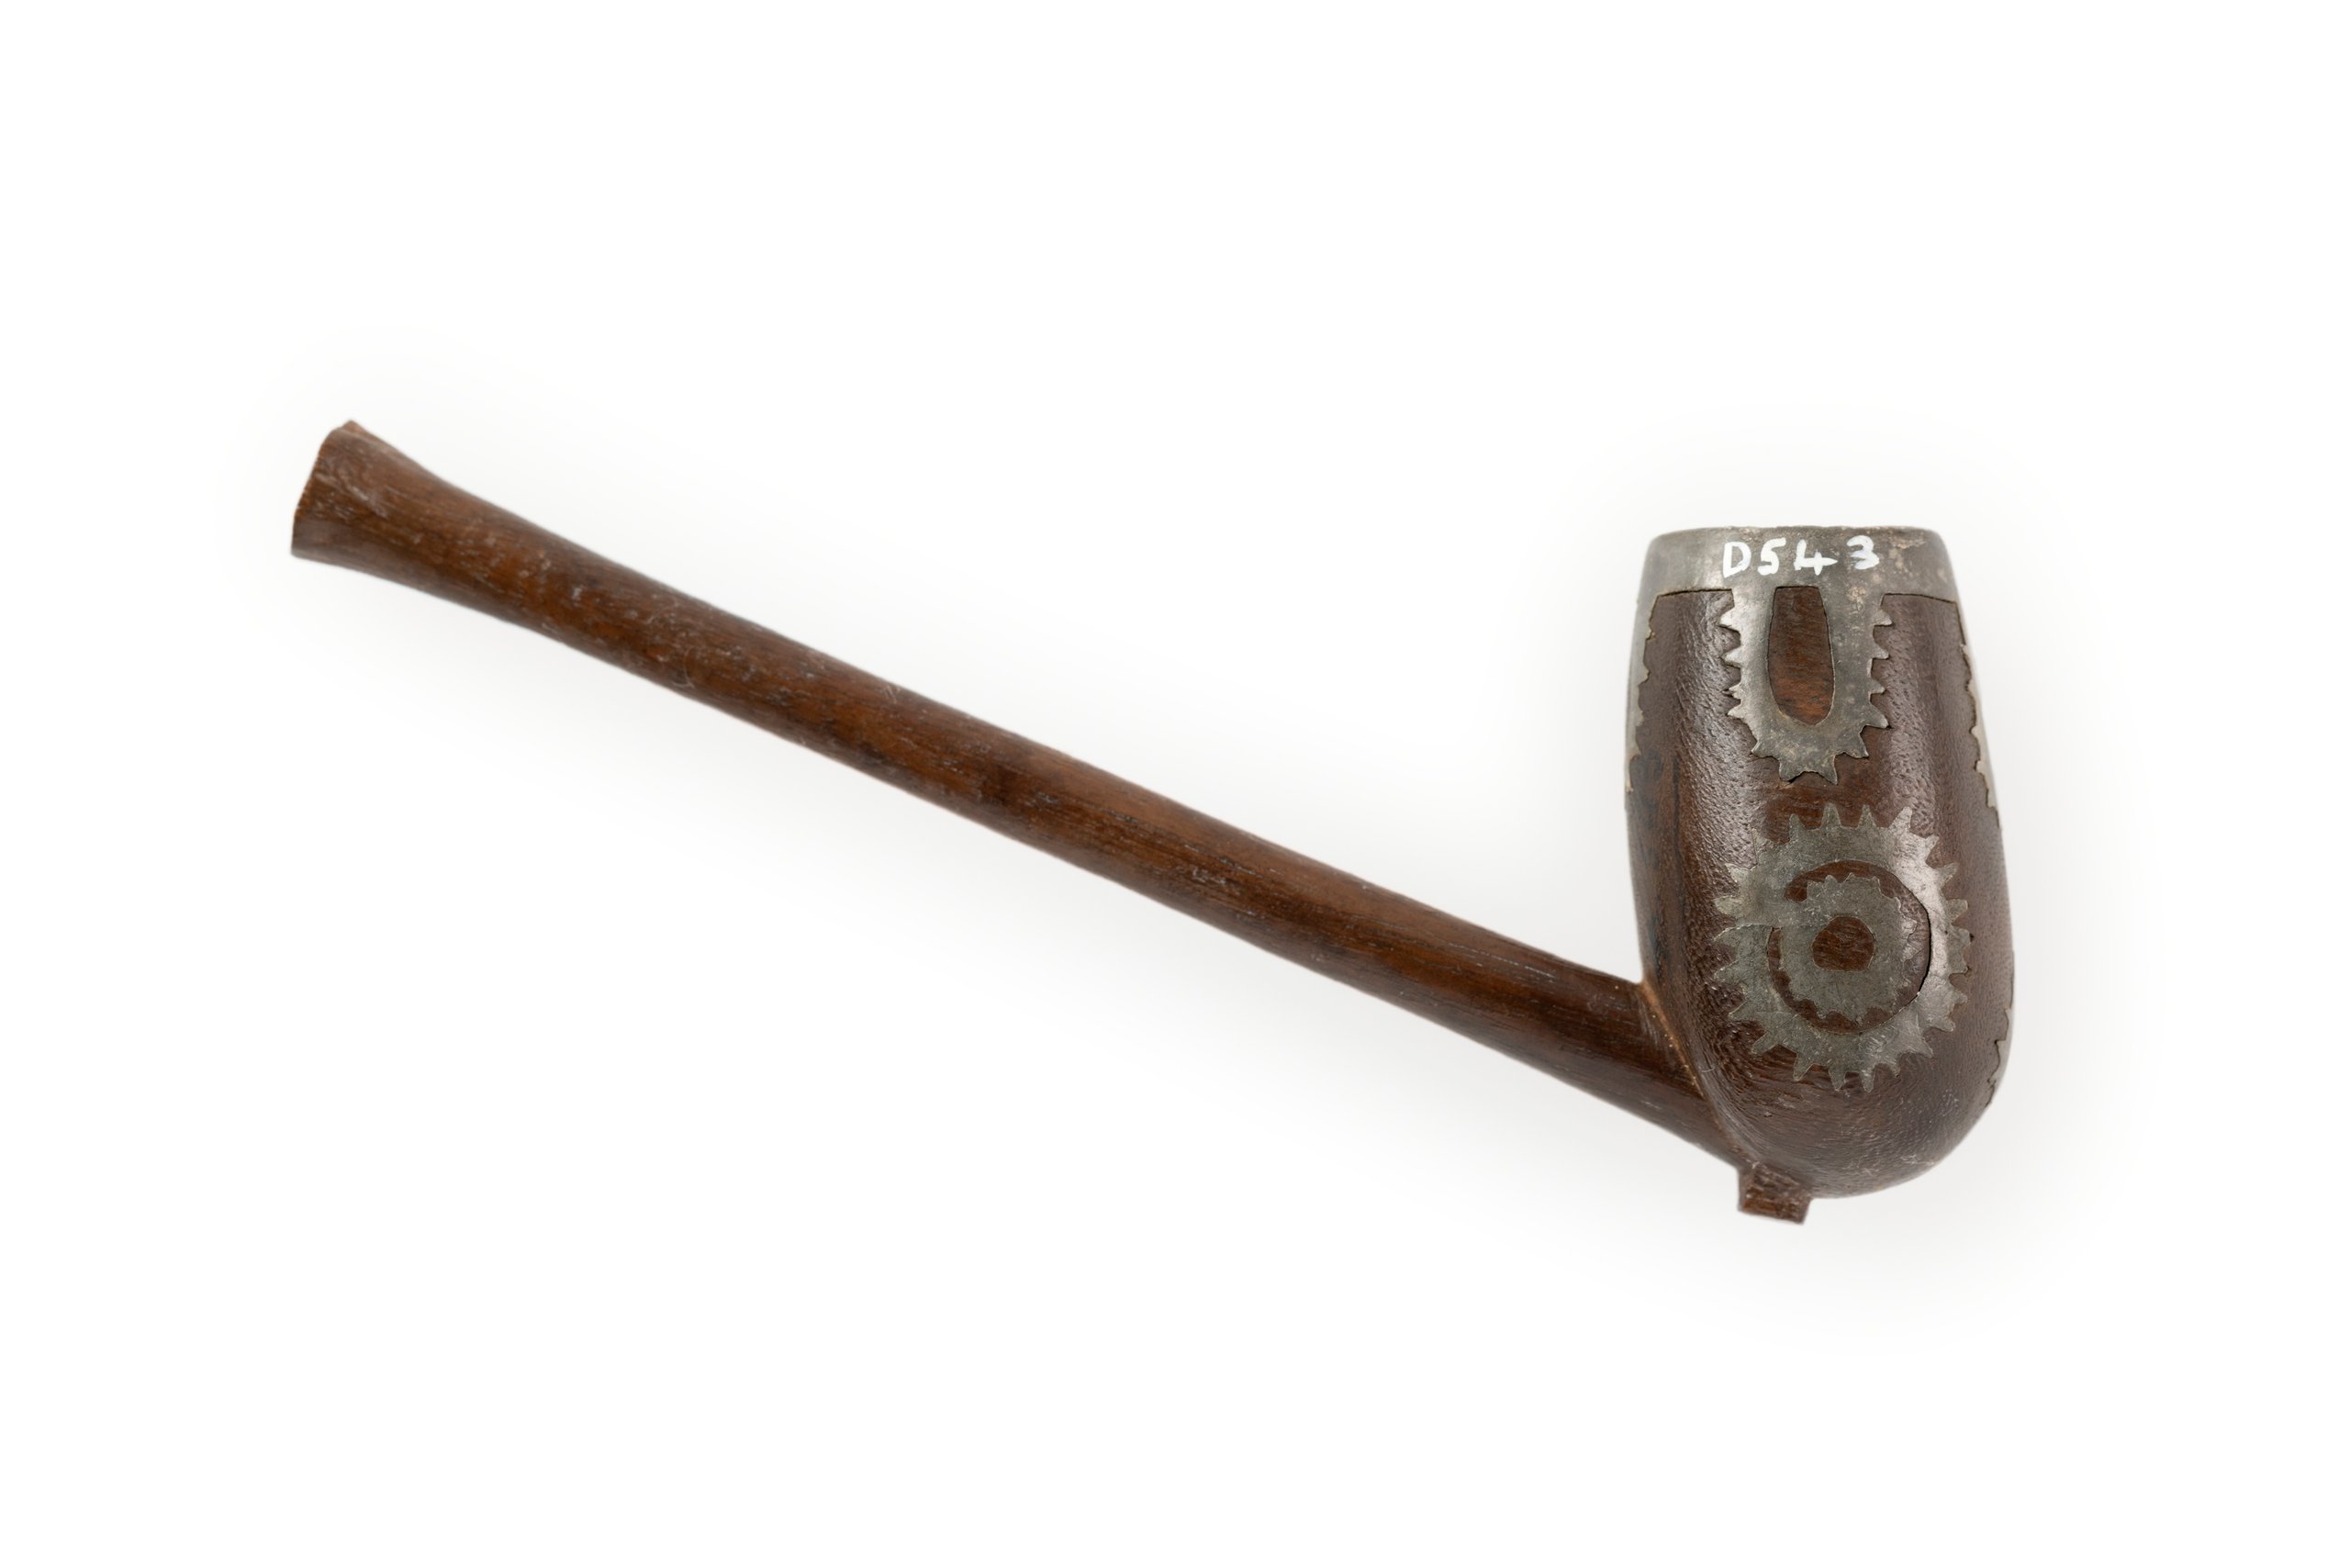 Wooden tobacco pipe decorated with lead